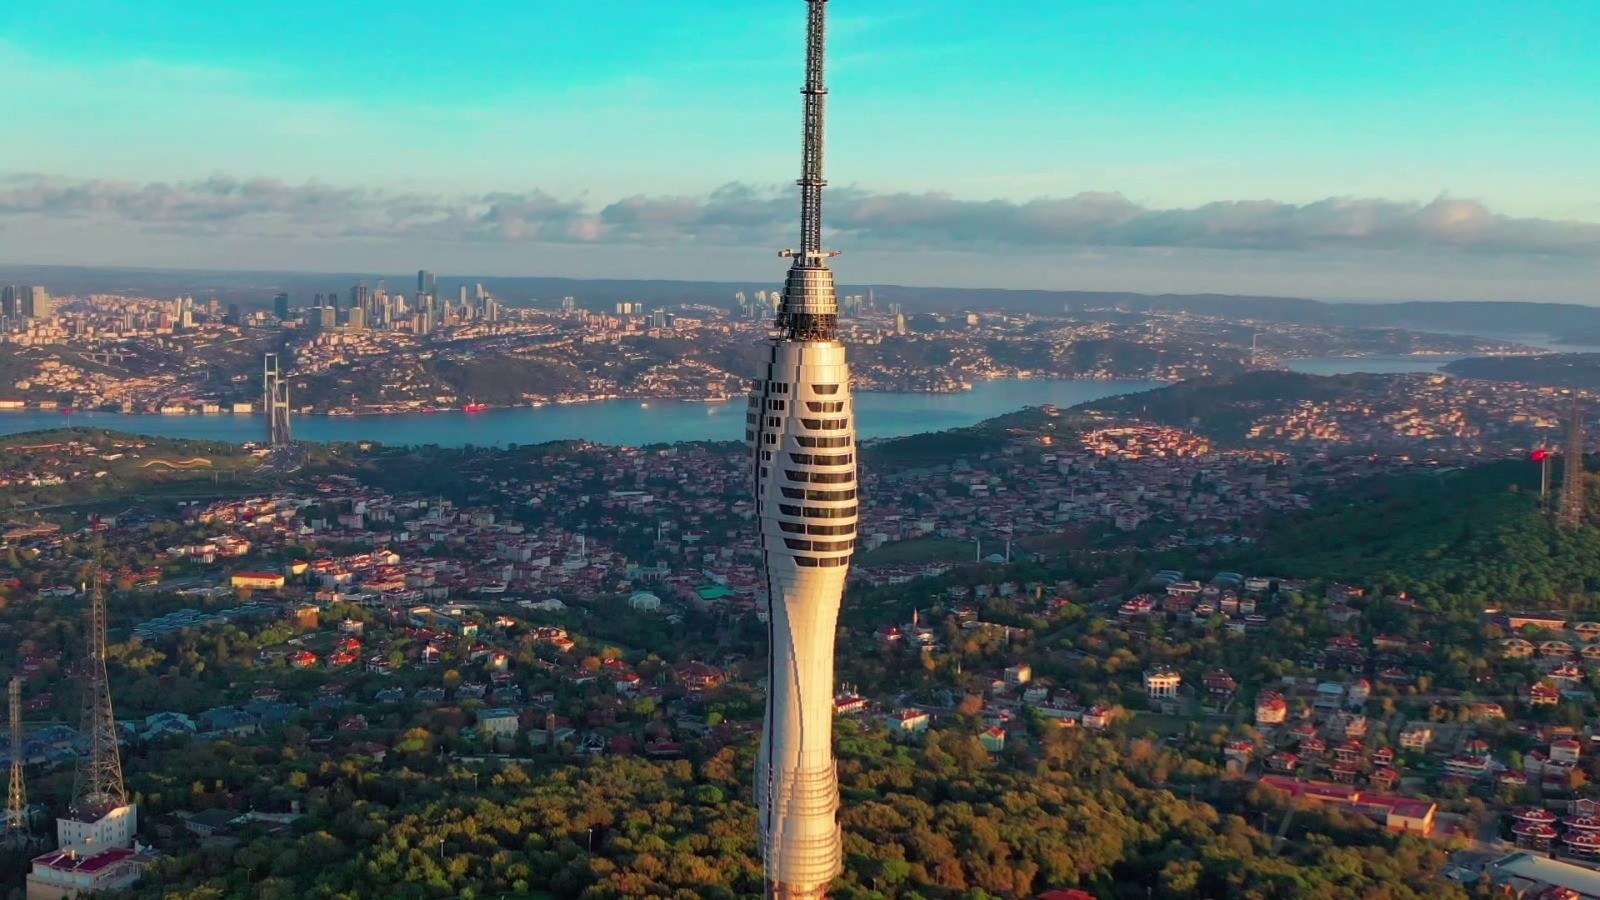 The Tallest Building In Istanbul... Camlica Tower